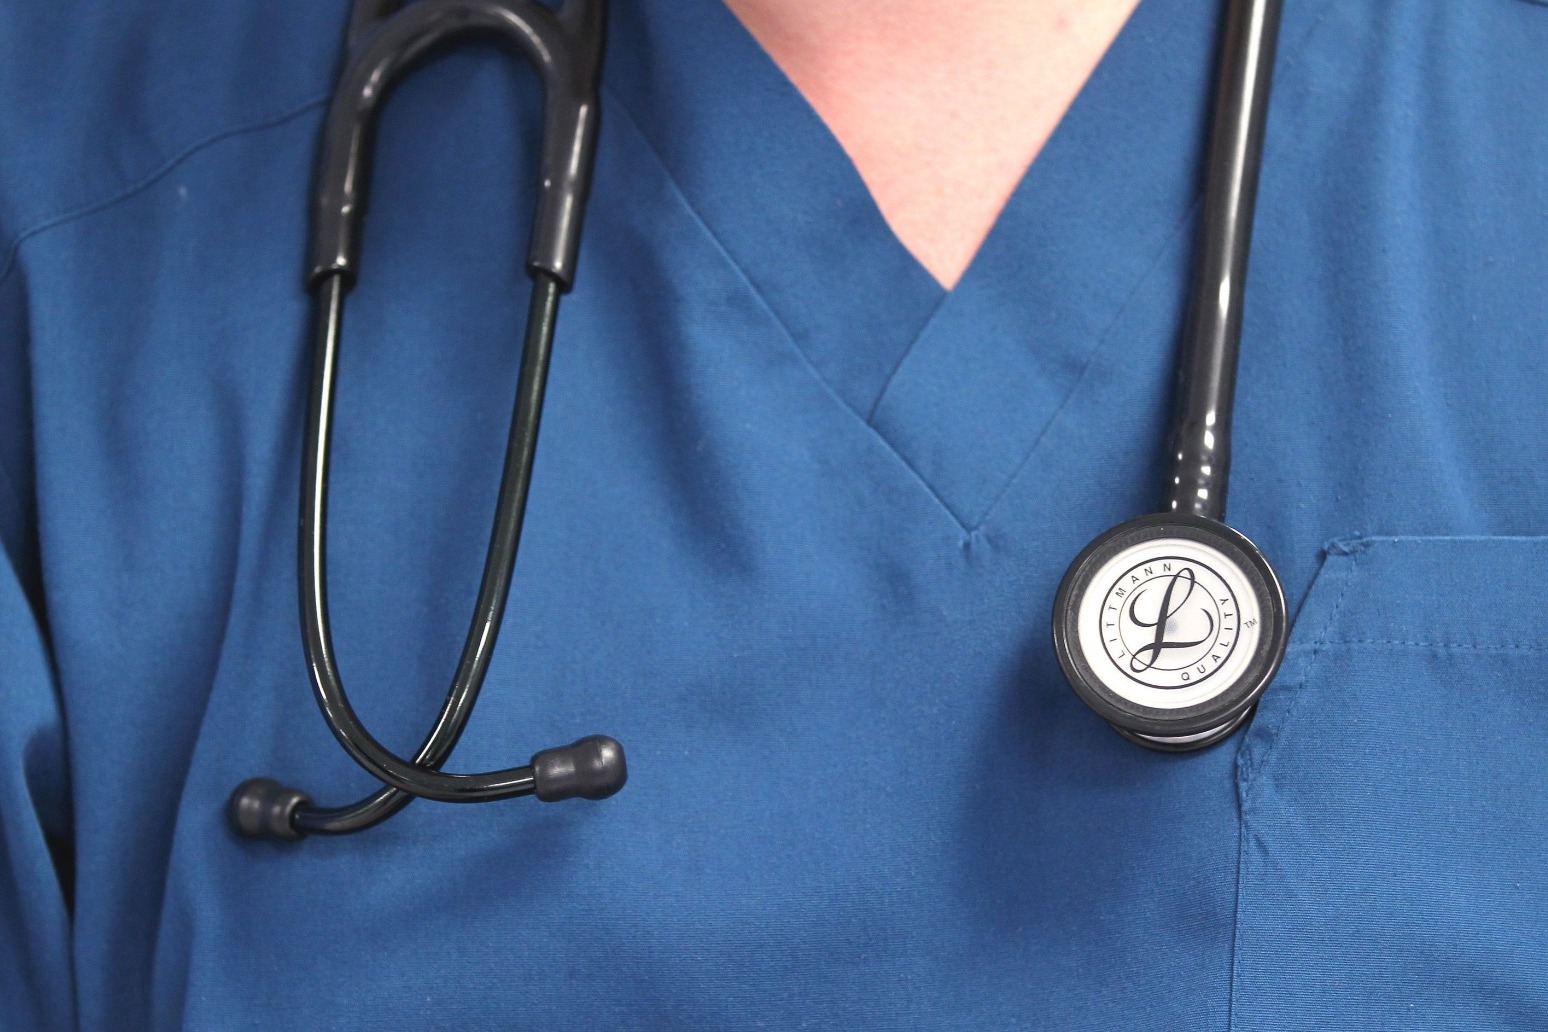 New report finds more than a fifth of doctors sexually harassed on the job 